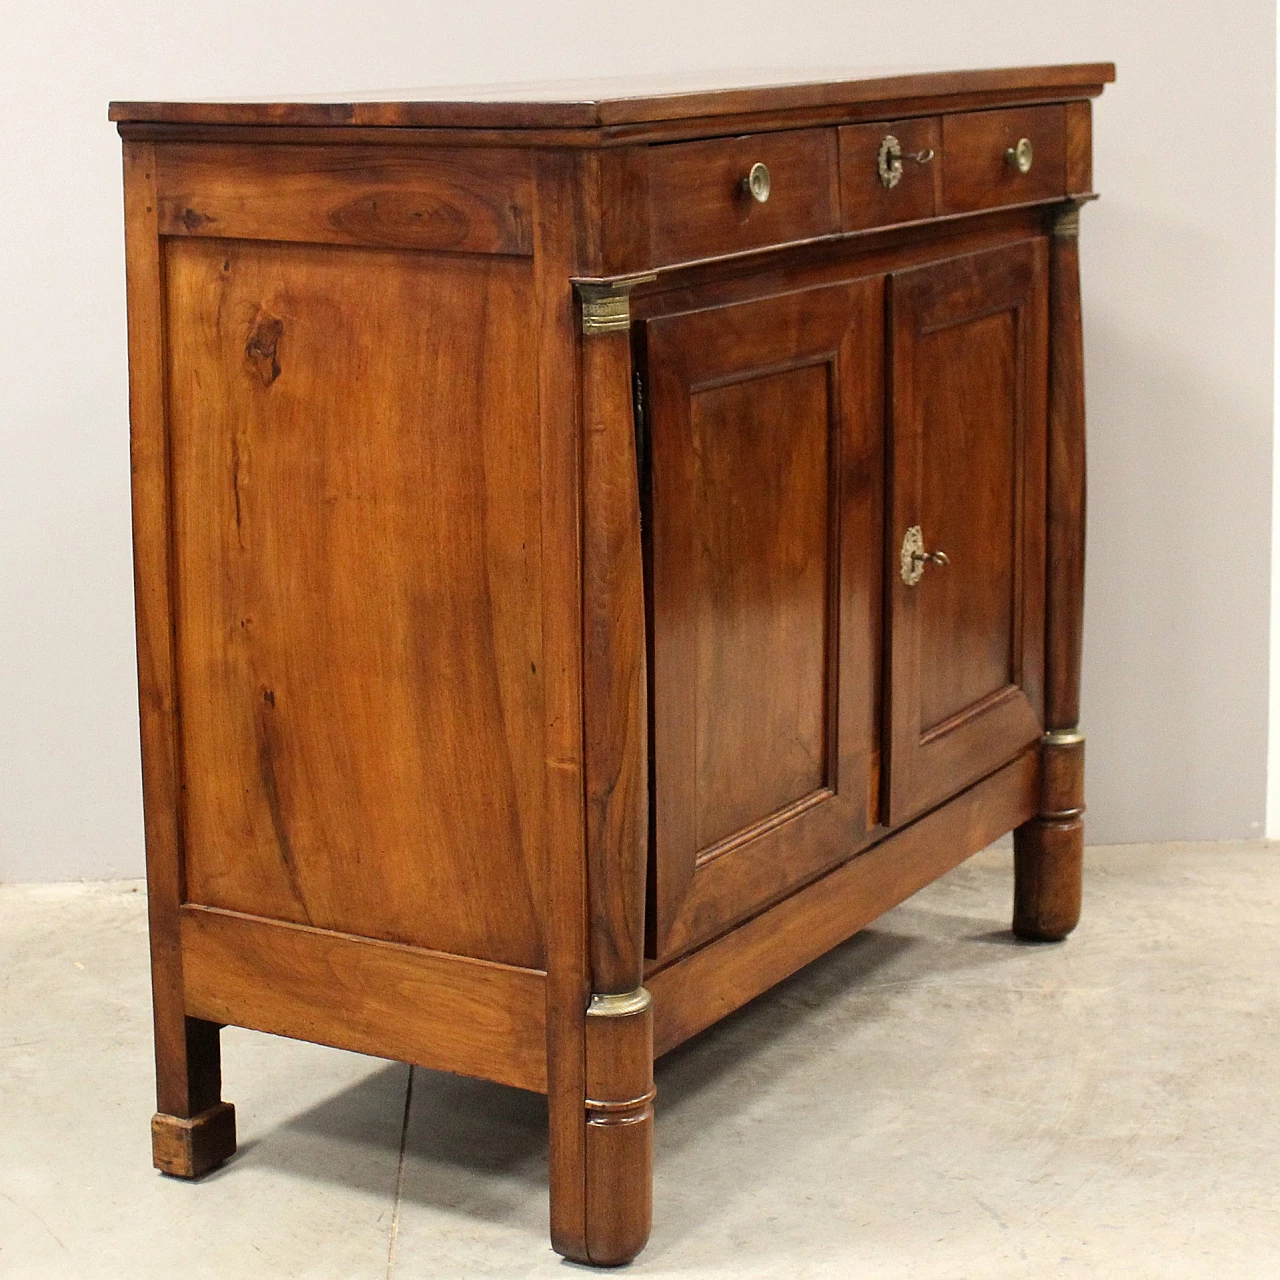 Empire walnut sideboard with doors and drawers, early 19th century 2